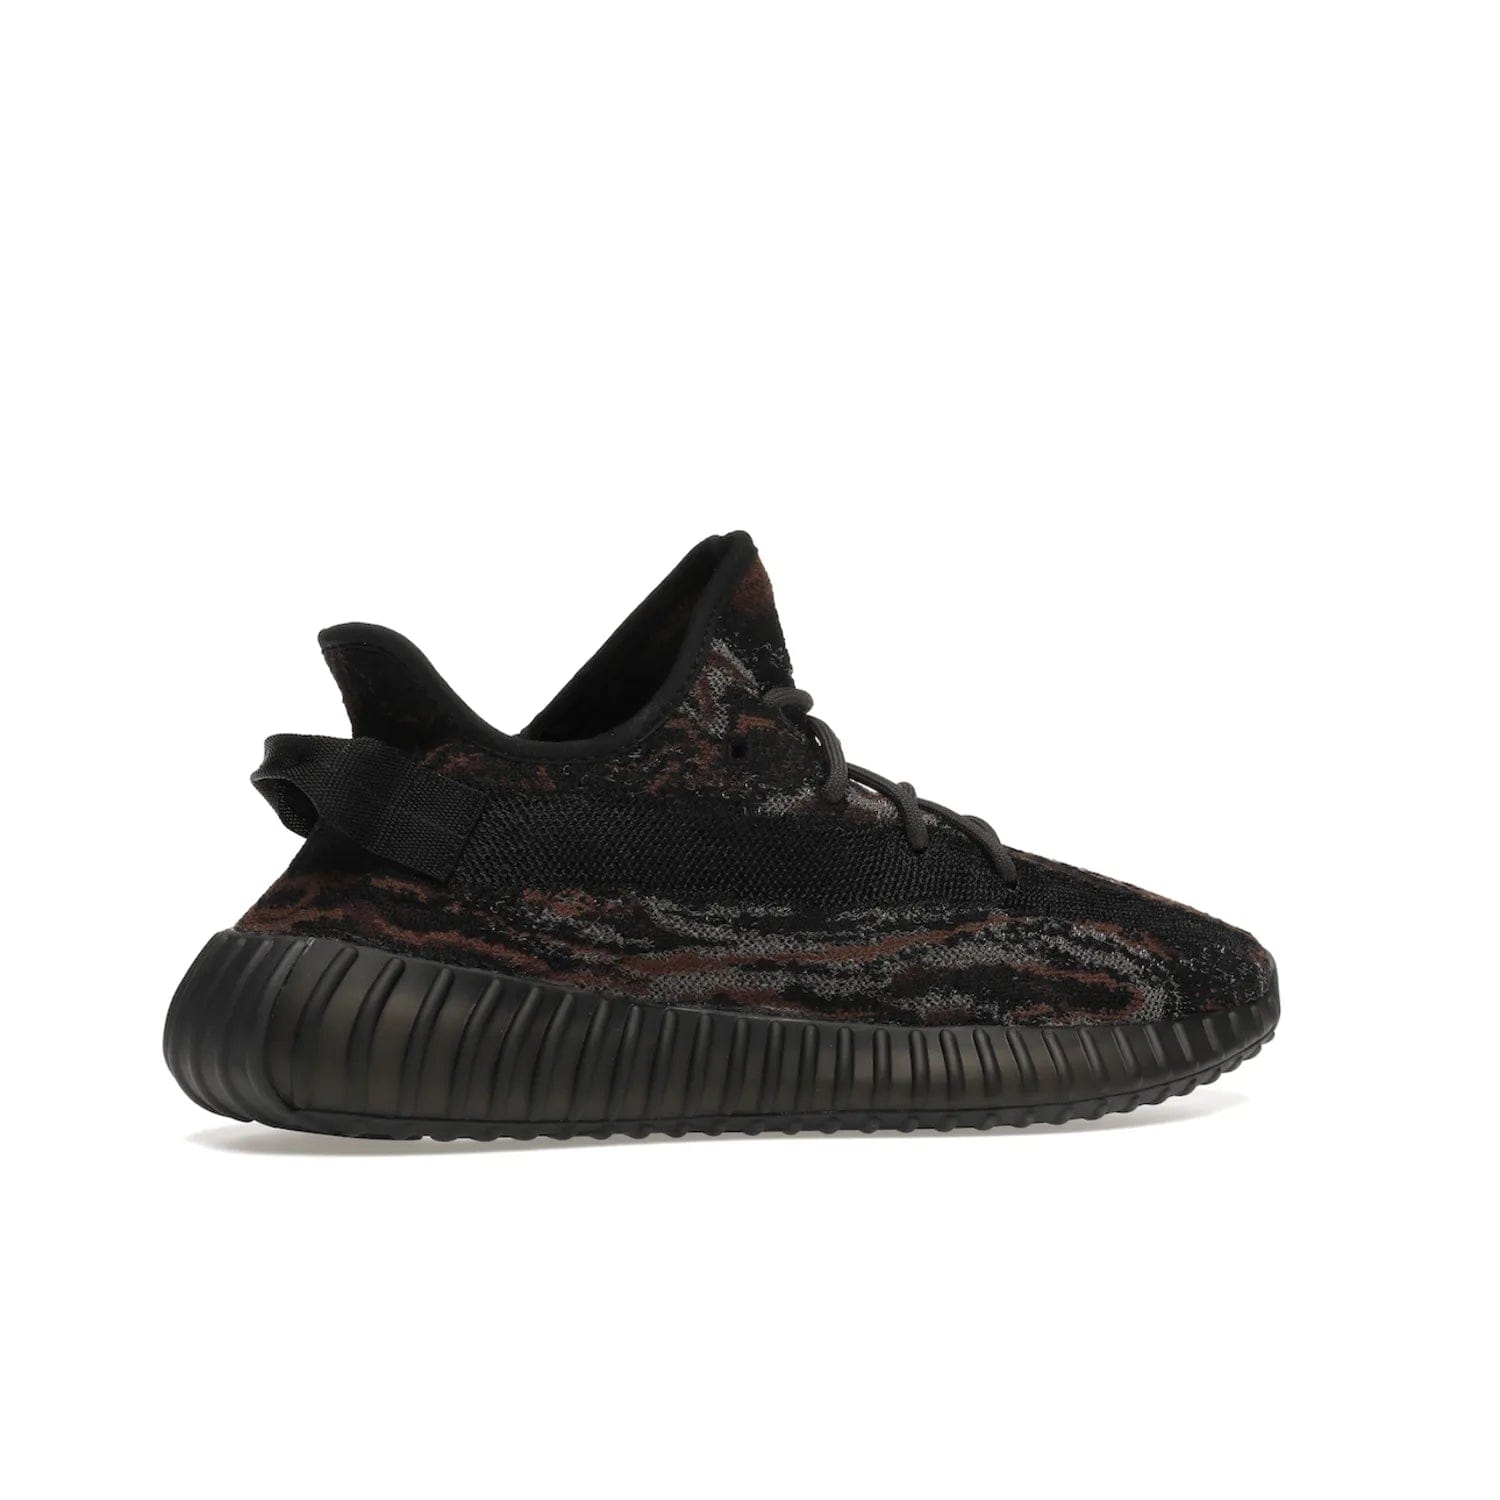 adidas Yeezy Boost 350 V2 MX Rock - Image 35 - Only at www.BallersClubKickz.com - The adidas Yeezy Boost 350 V2 MX Rock features a stylish marbled upper of black, grey, and brown tones. Shop the signature Boost sole, heel tab, and mesh side stripe now, available December of 2021.